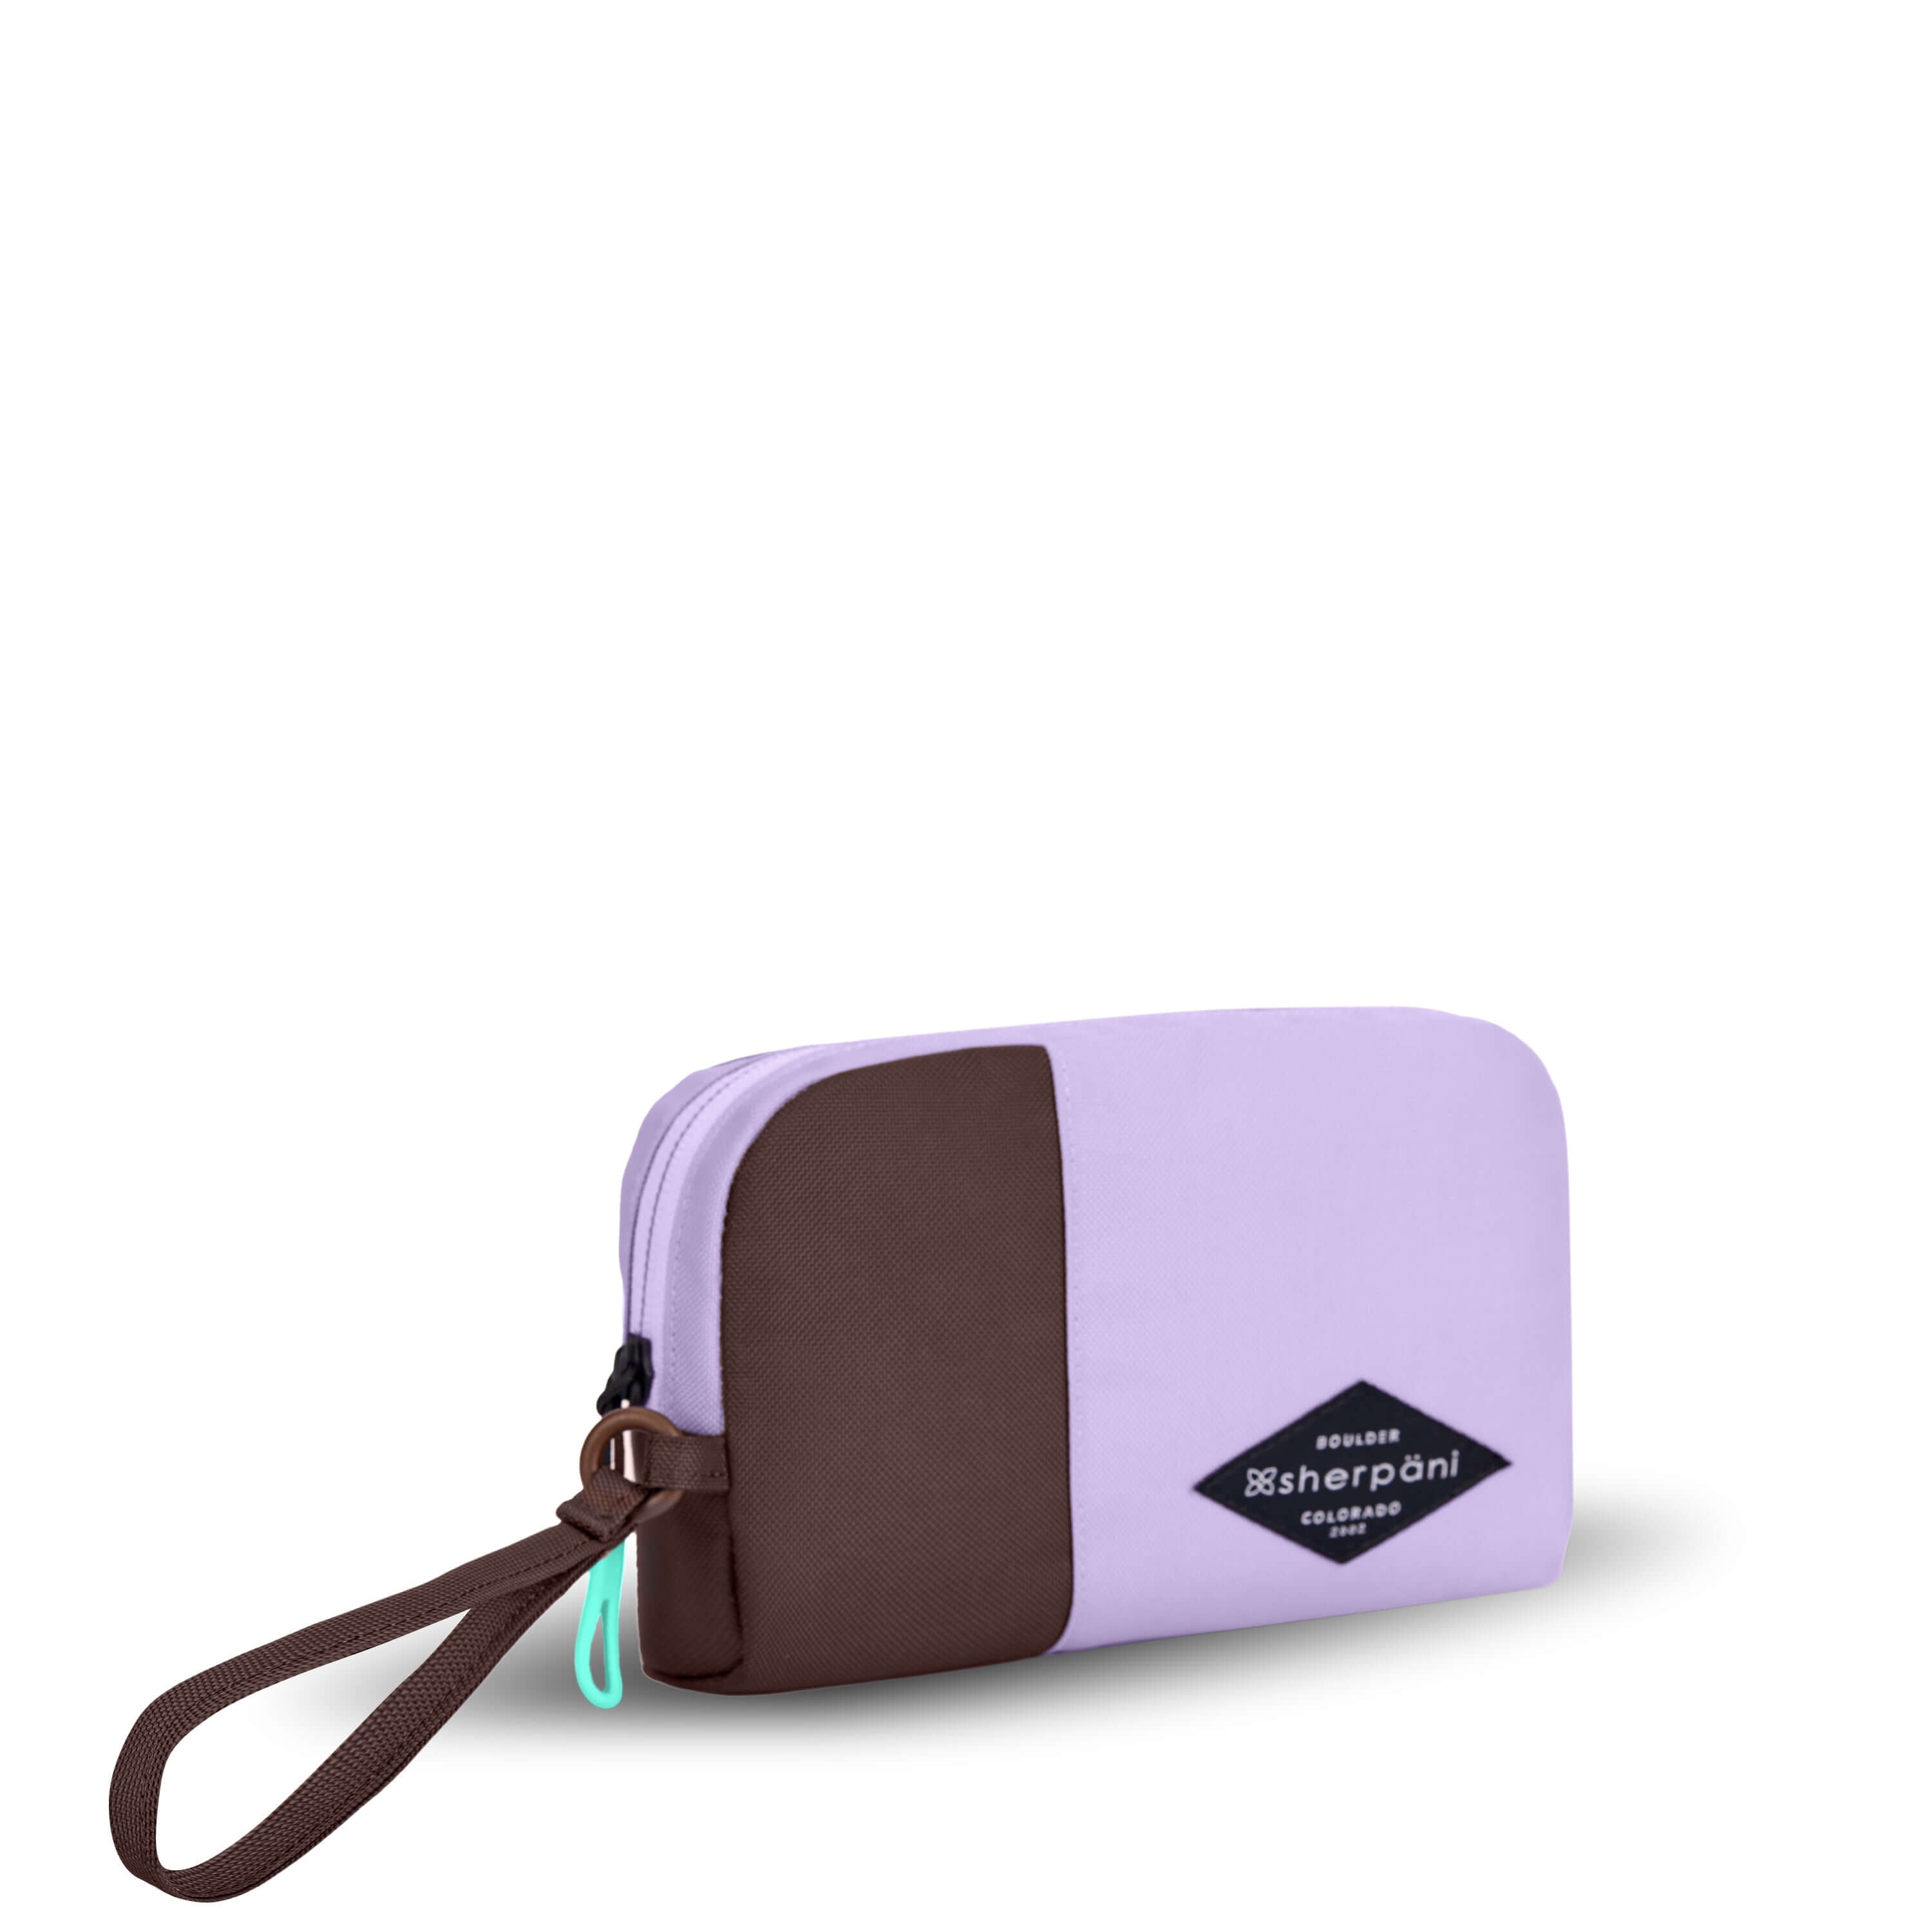 Angled front view of Sherpani travel accessory, the Jolie in Lavender, in small size. The pouch is two-toned in lavender and brown. It features a brown wristlet strap and an easy-pull zipper accented in aqua. #color_lavender